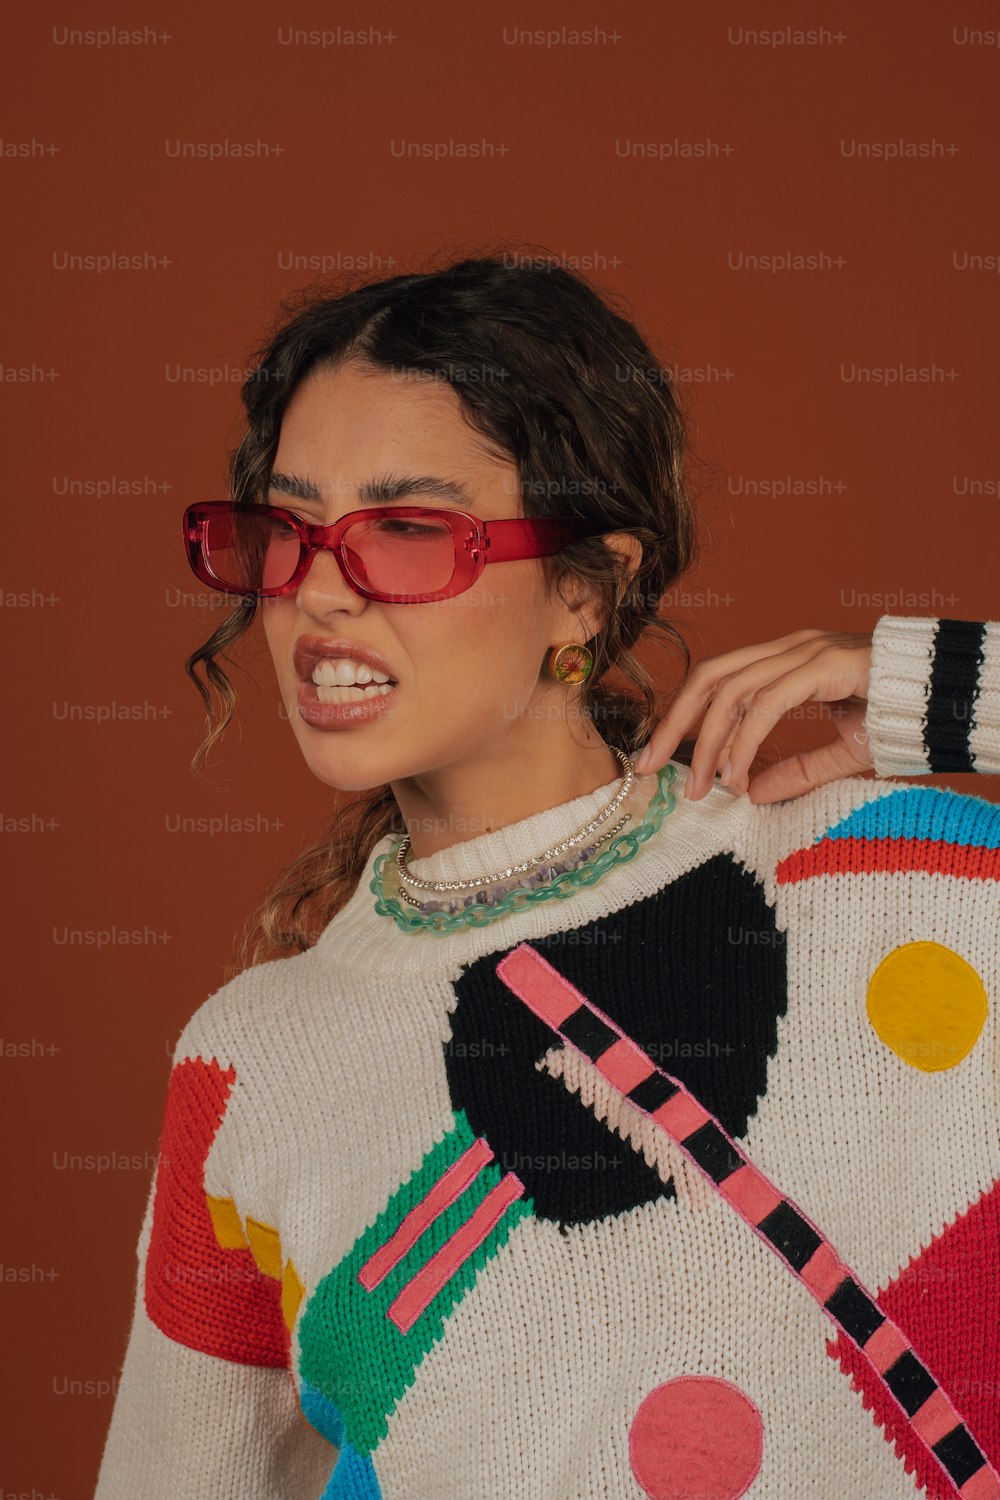 a woman wearing red glasses and a colorful sweater